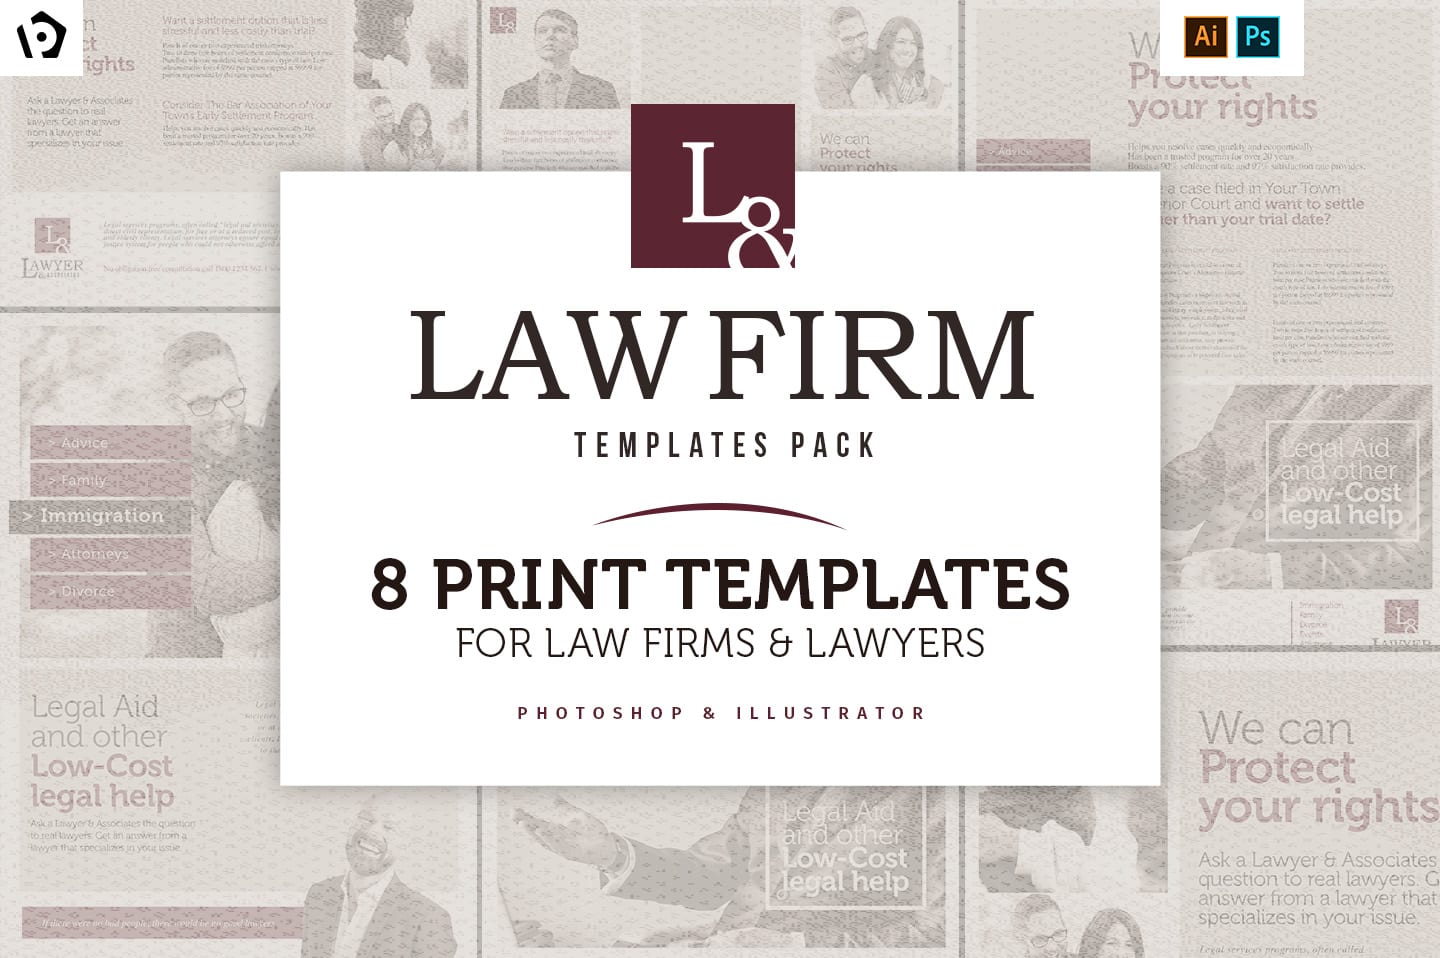 Law Firm Templates Pack